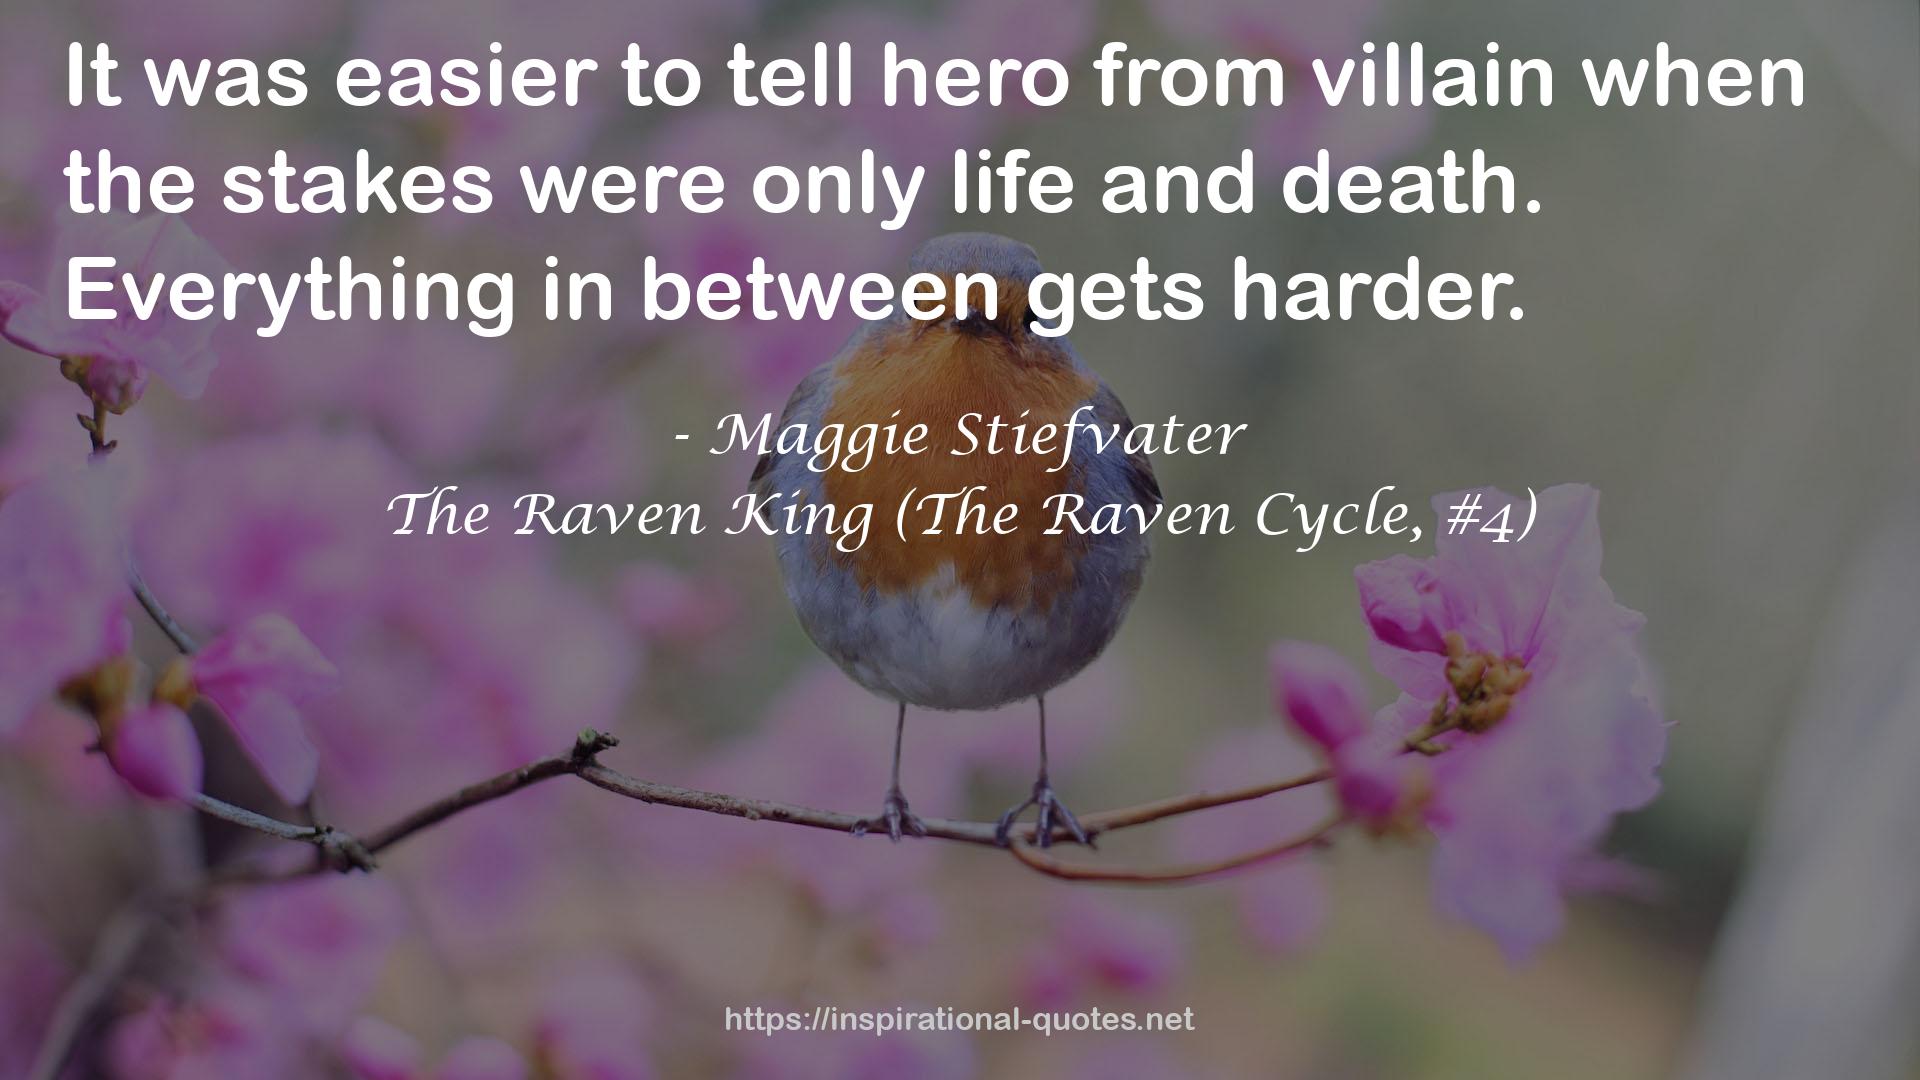 The Raven King (The Raven Cycle, #4) QUOTES